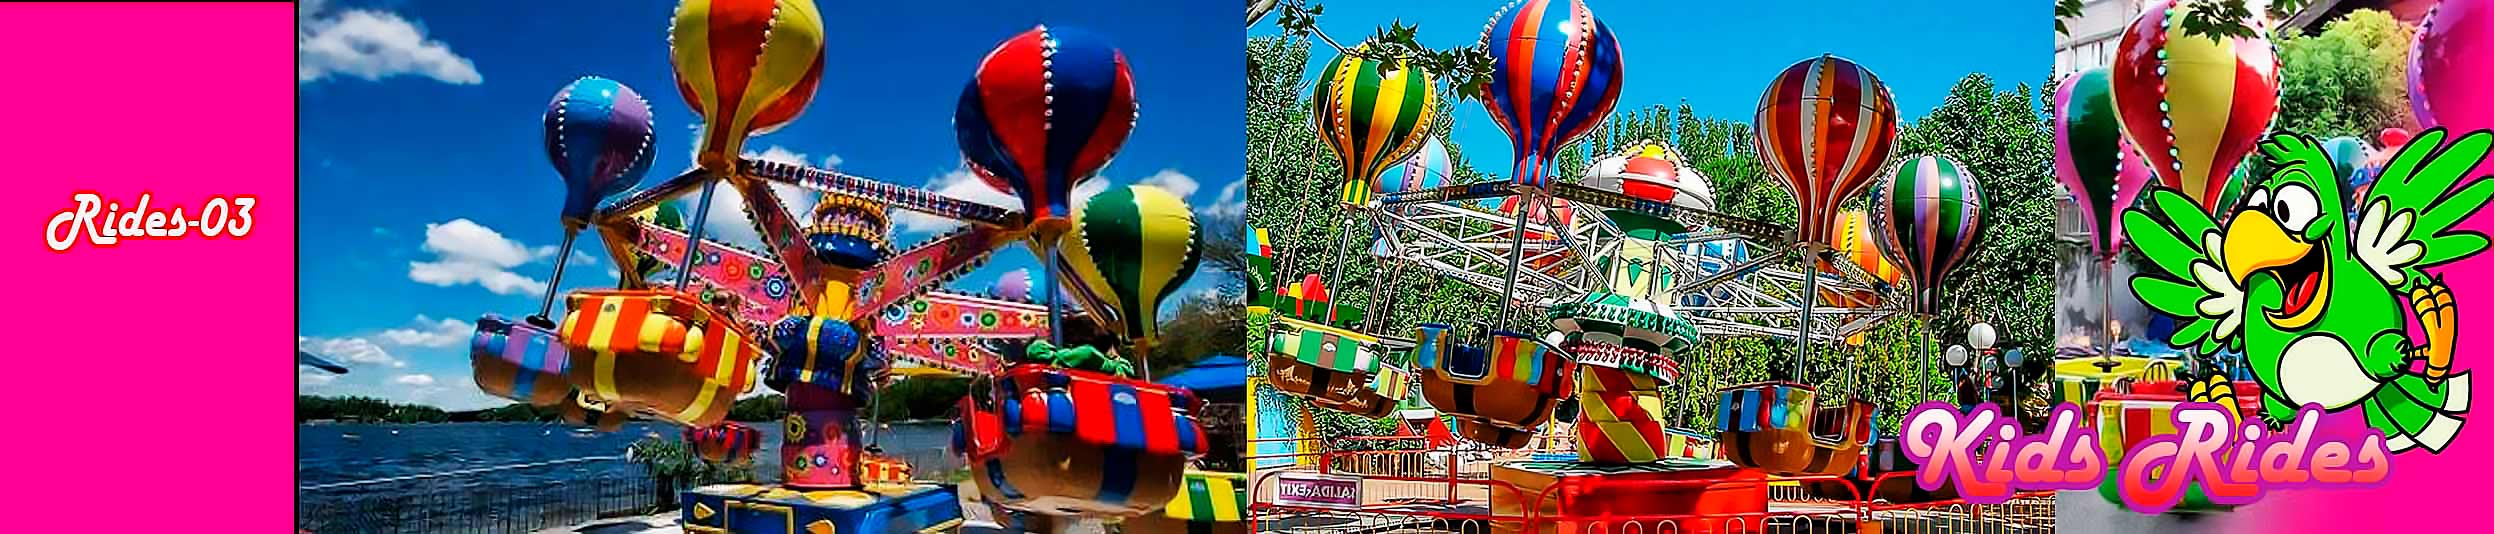 attractions _rides_rollercoasters_for theme parks _3